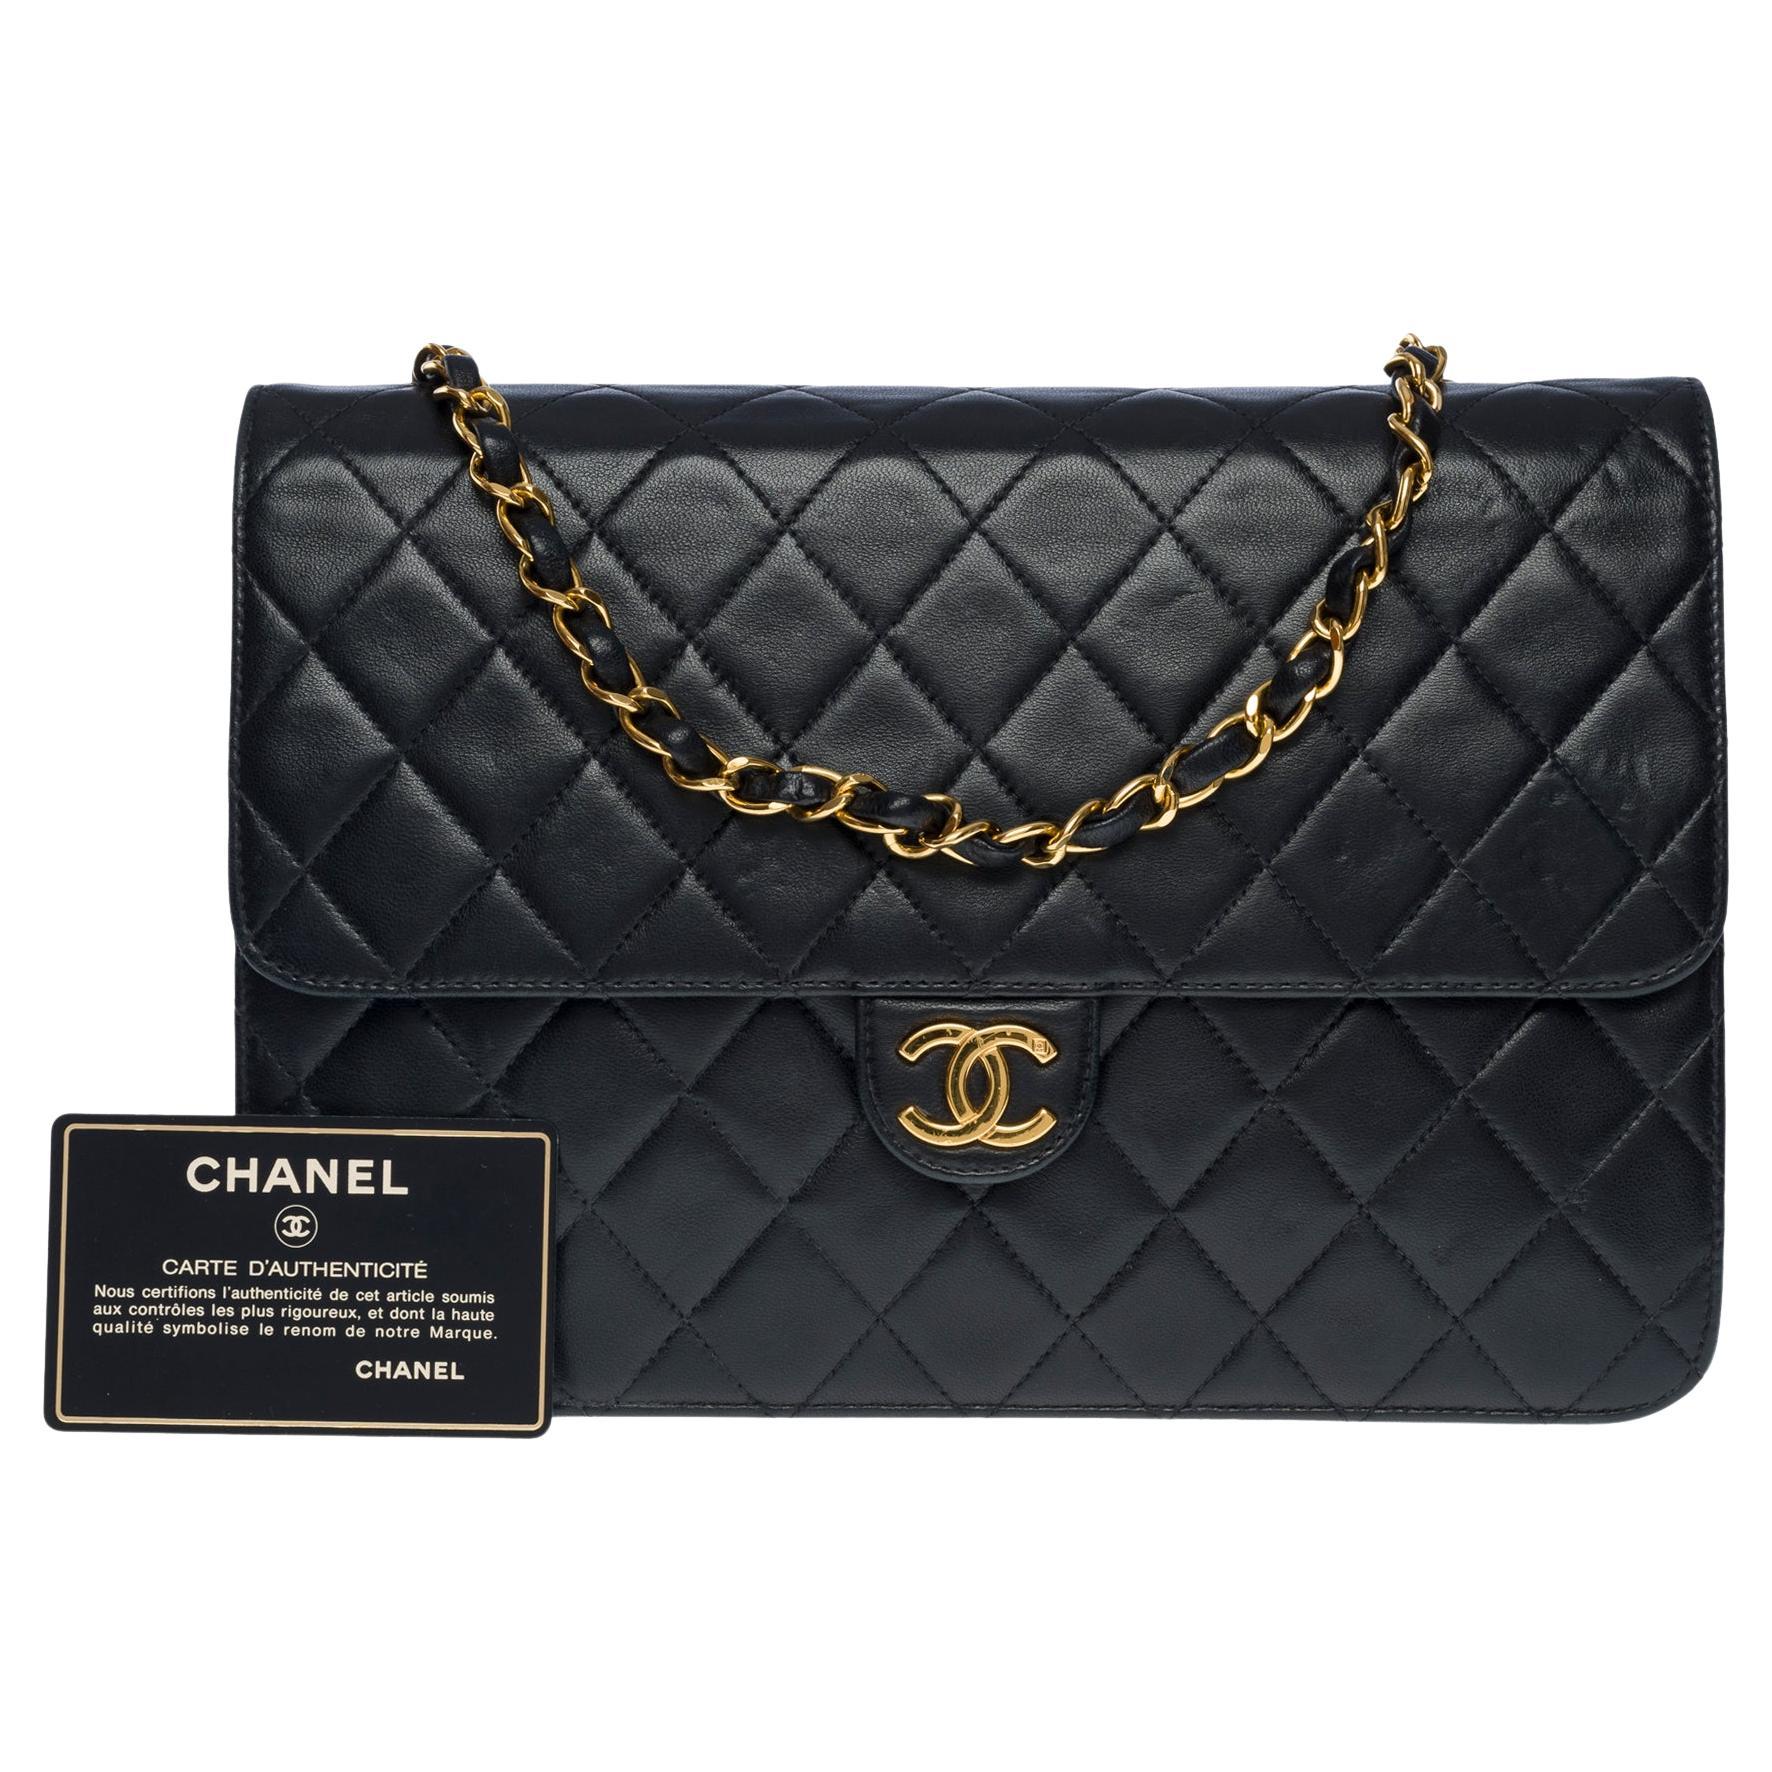 Gorgeous Chanel Classic shoulder flap bag in black quilted lambskin leather, GHW